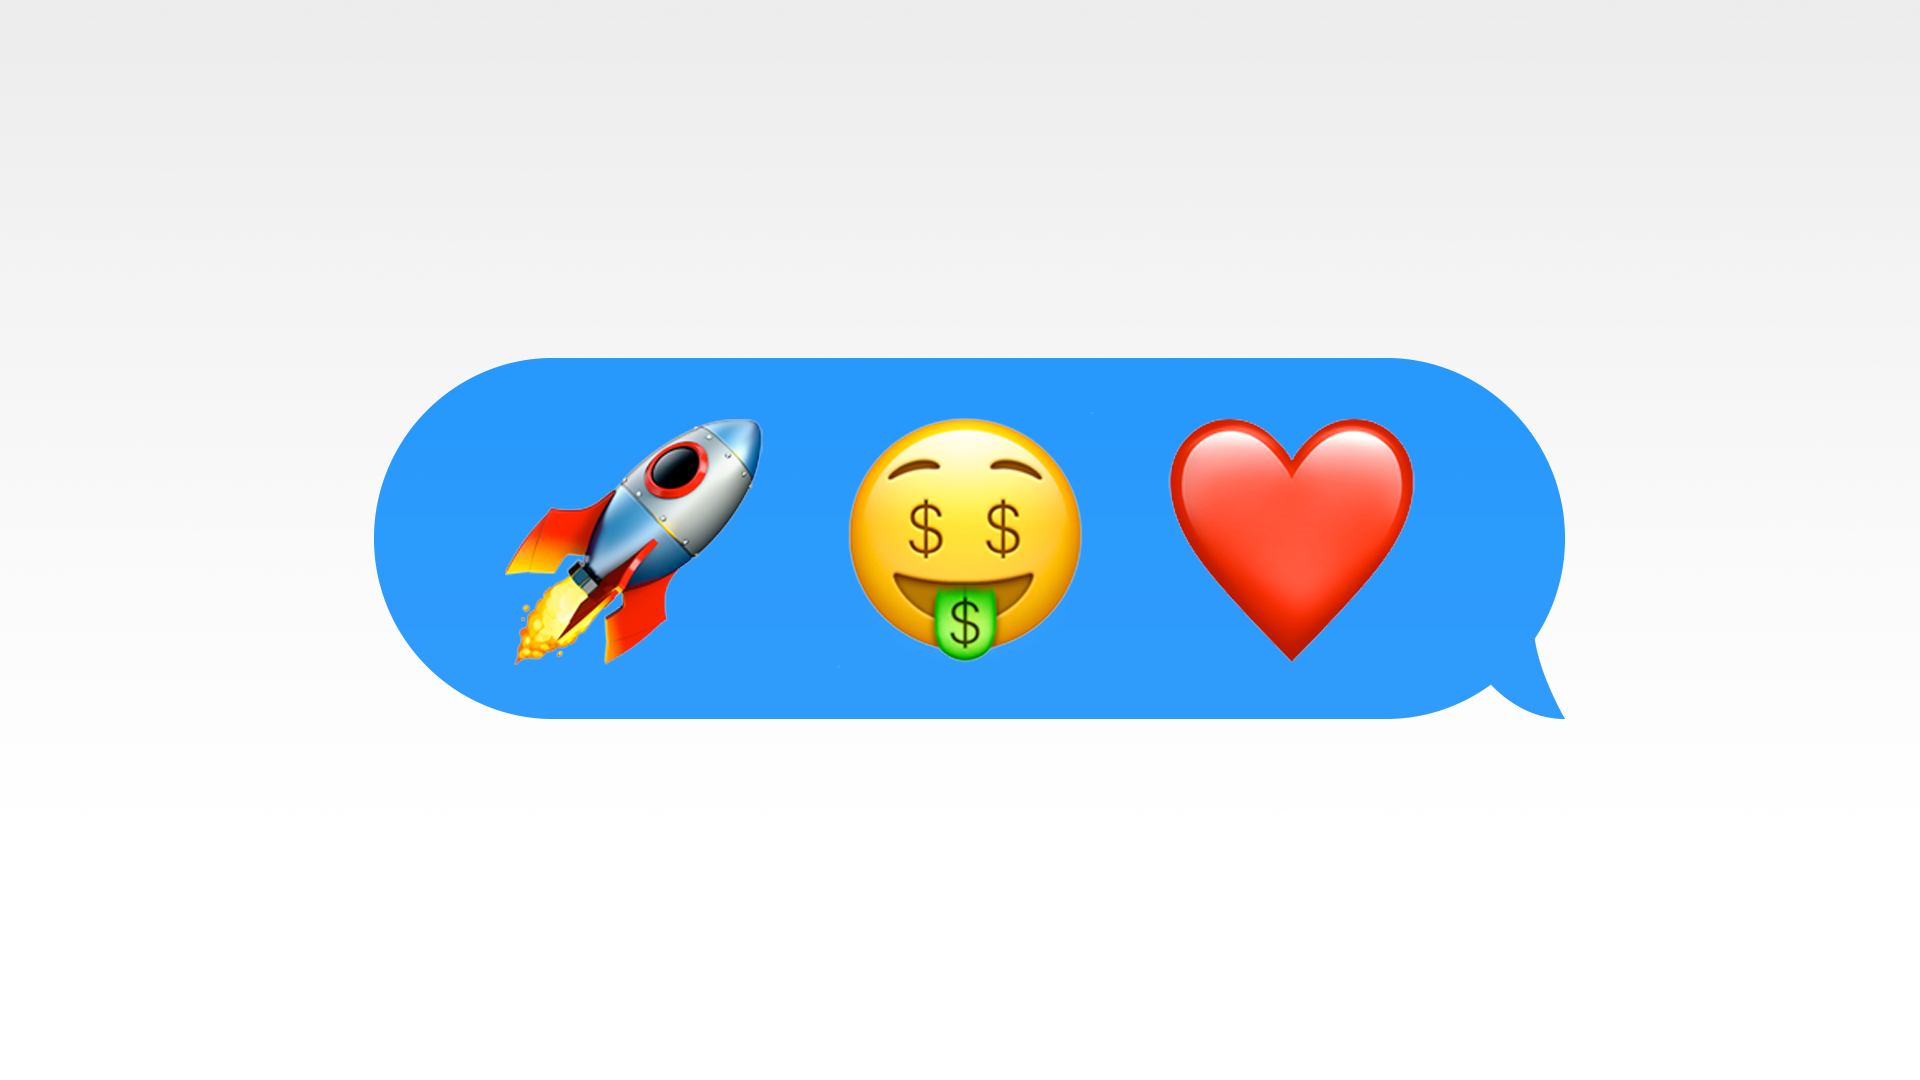 Illustration of a text message with a rocket emoji, a money-eye face emoji, and a heart emoji